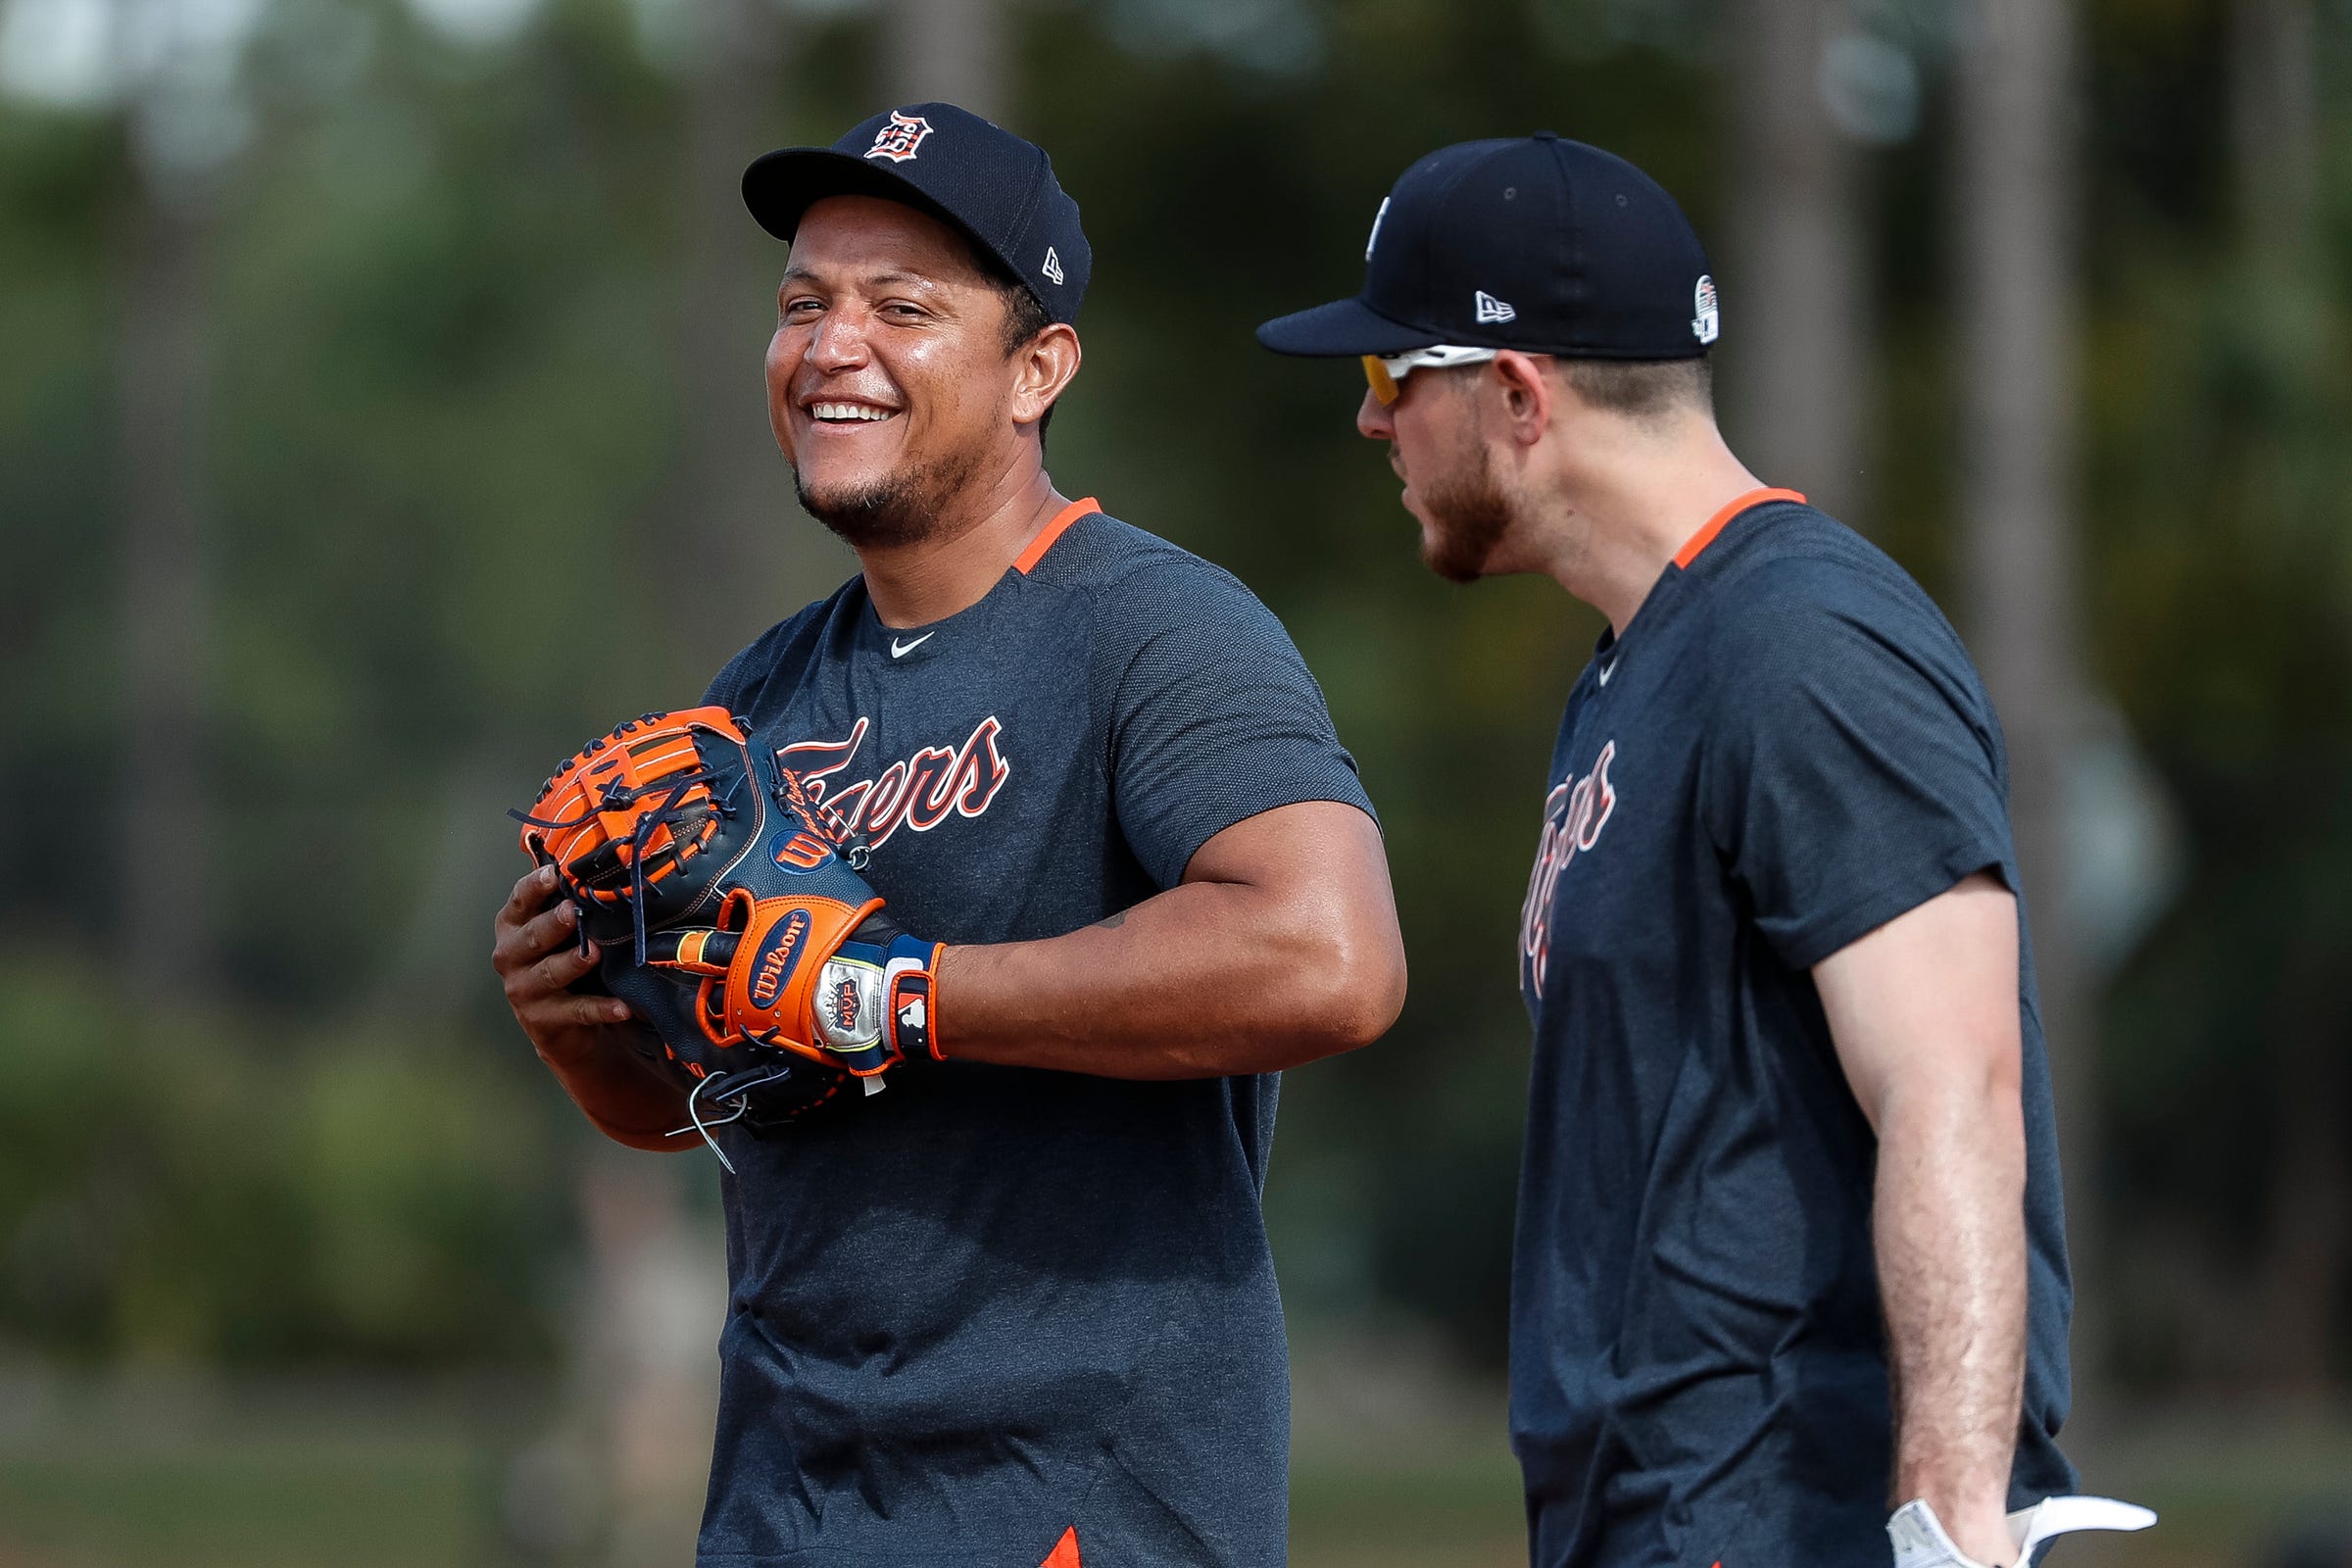 Miguel Cabrera, left, talks to first baseman C.J. Cron during Detroit Tigers spring training at TigerTown in Lakeland, Fla., Tuesday, Feb. 18, 2020.